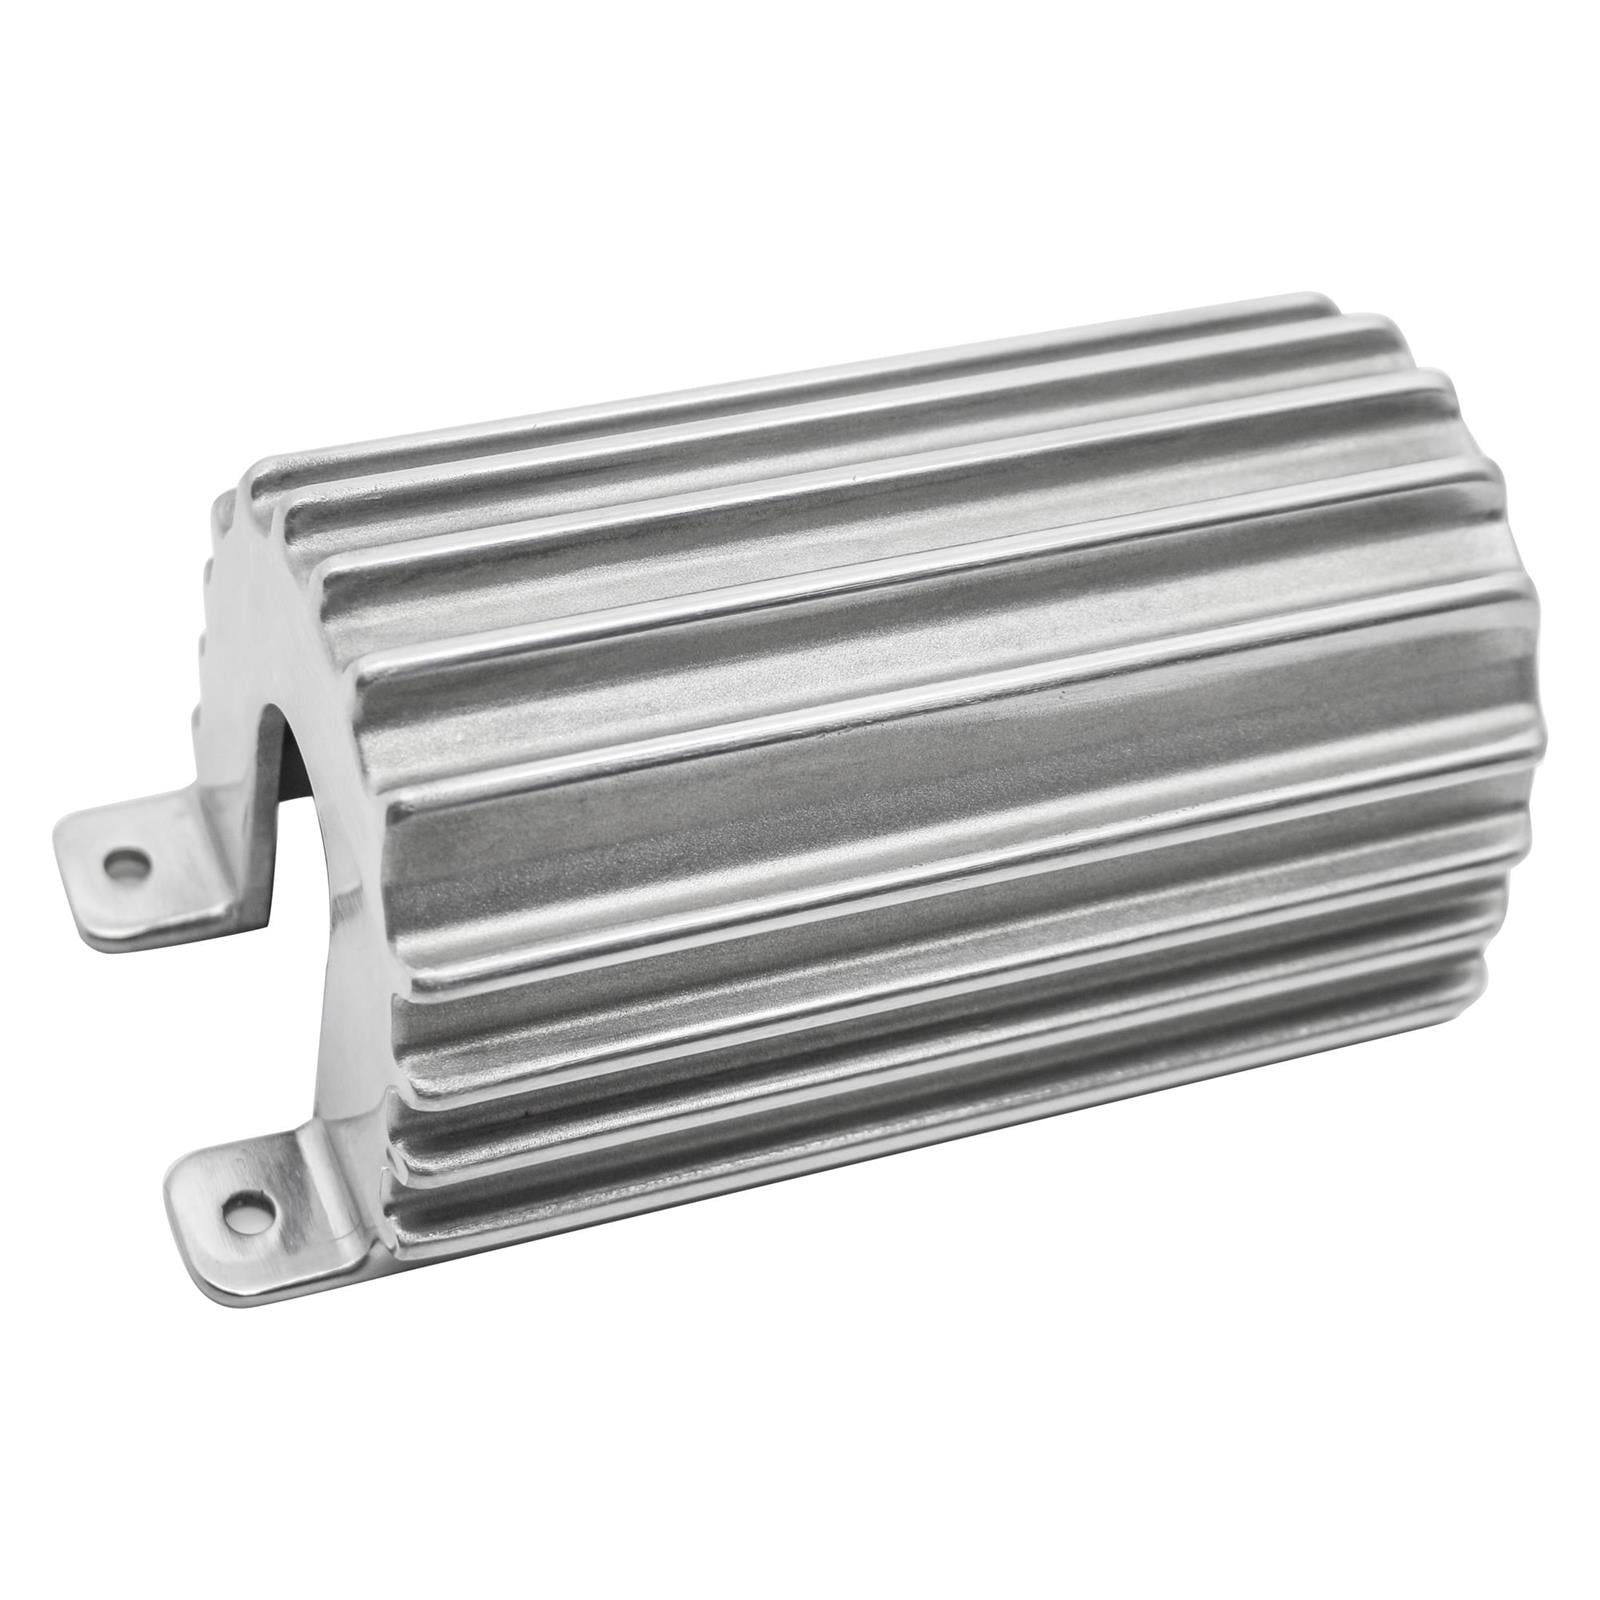 Polished Aluminum Finned Ignition Coil Cover Round